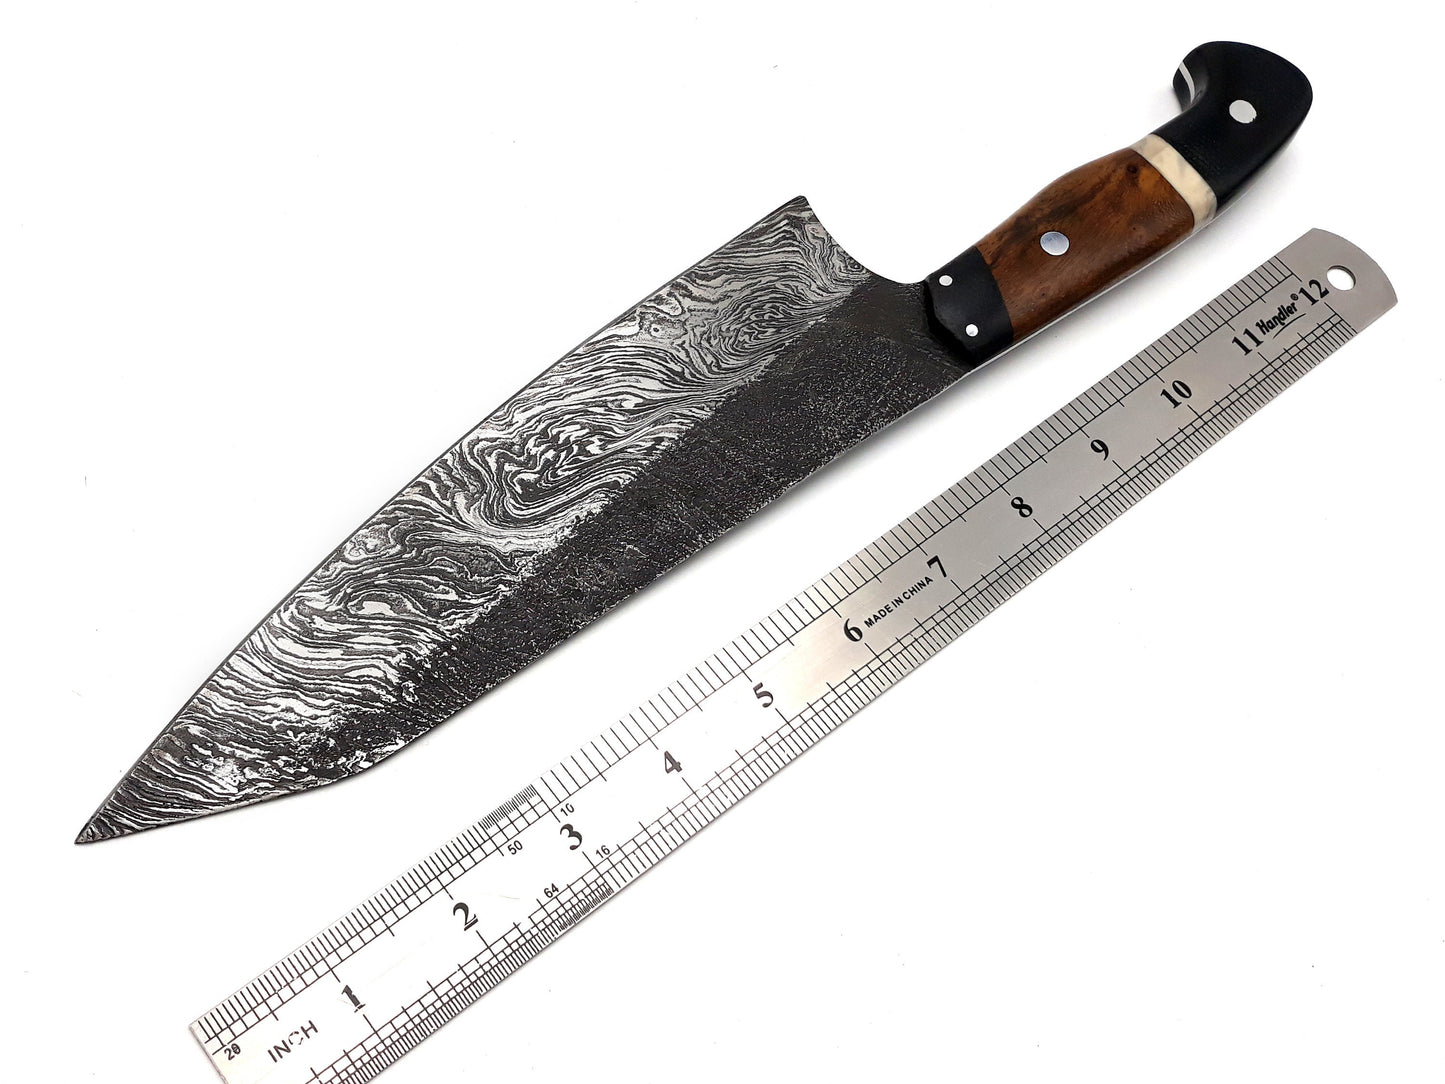 Damascus Steel, Chef Knife, Kitchen Knife, Handmade Knife, Christmas Gift, Father's Day Gift, Anniversary Gift, Butcher Knife